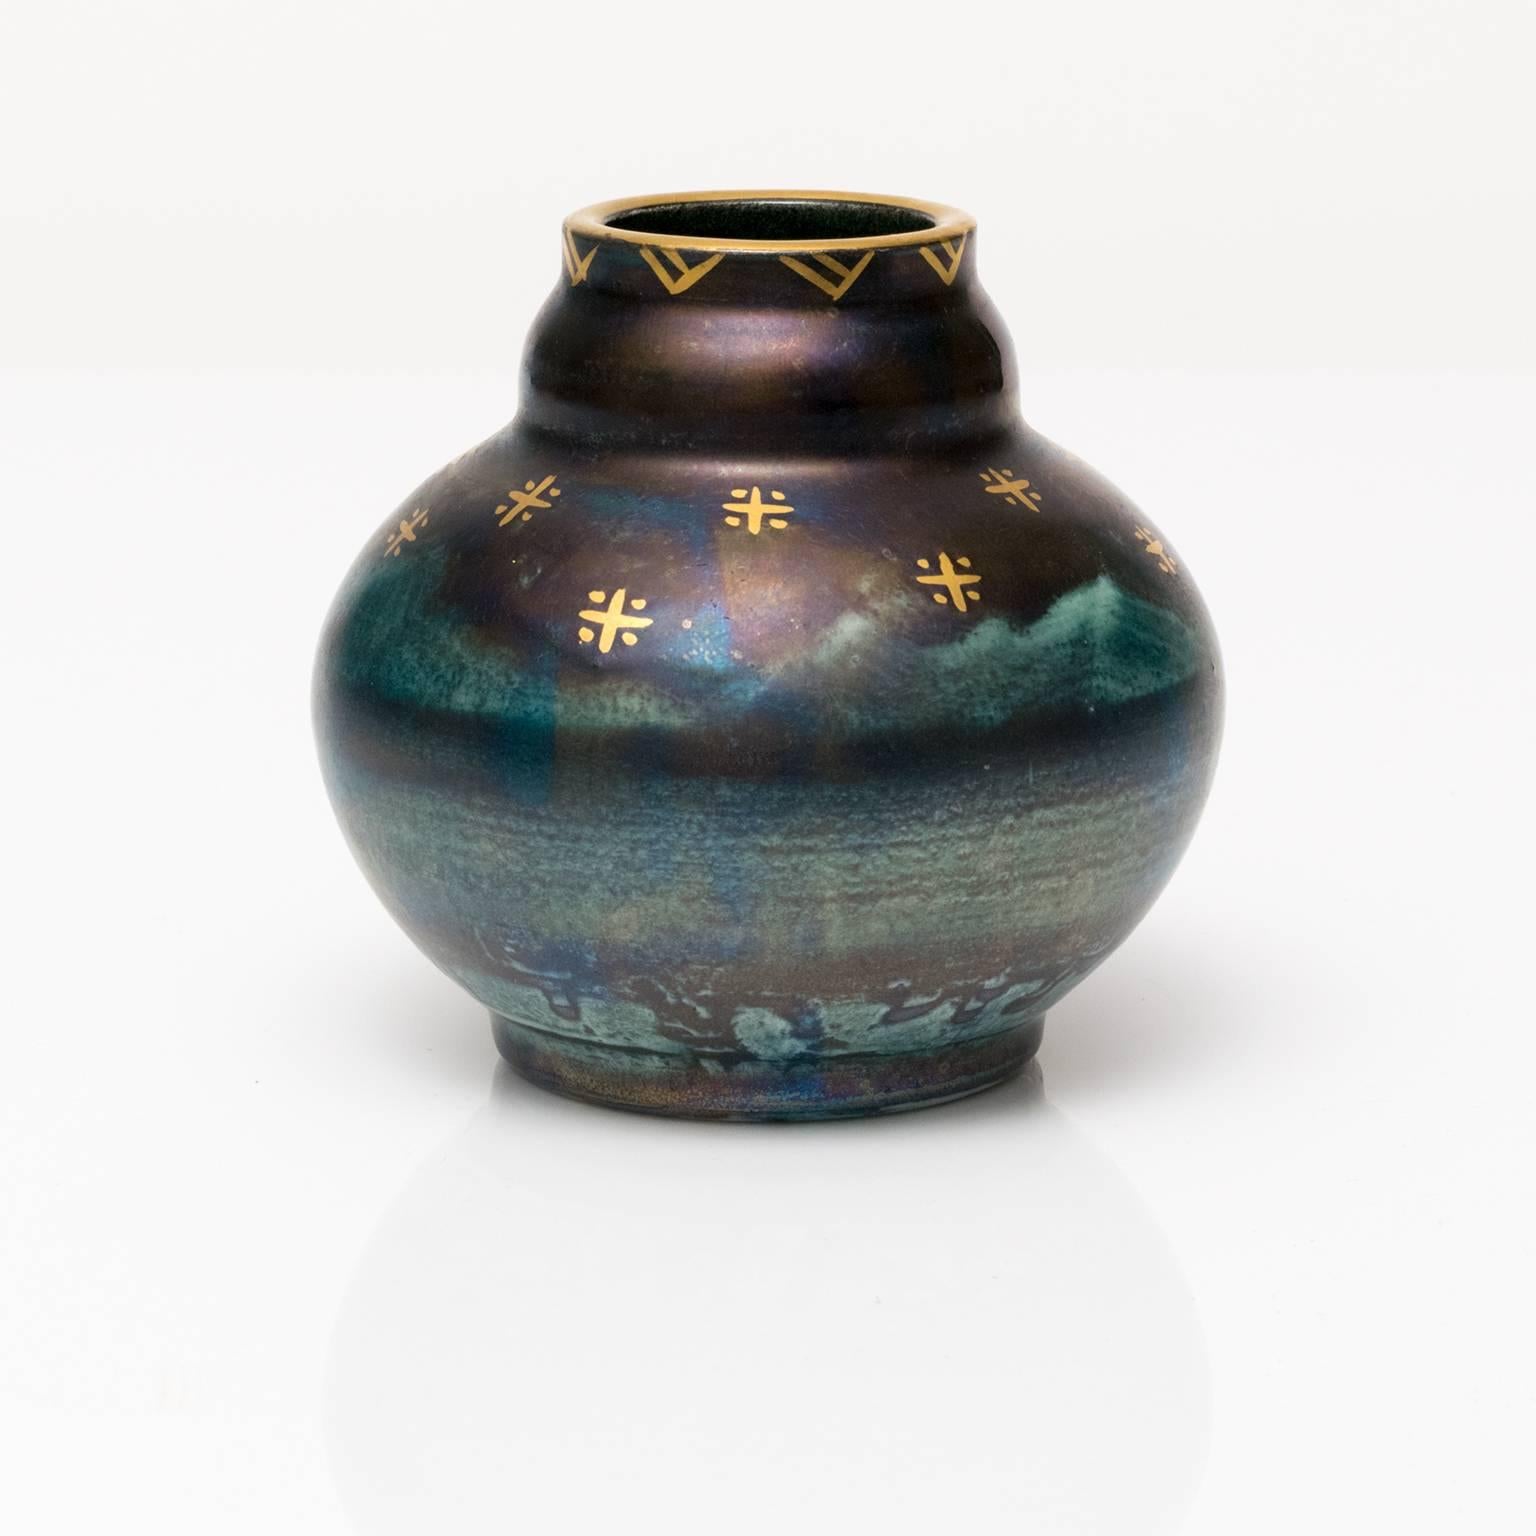 A small Scandinavian Modern, Art Deco ceramic vase with blue luster detailed in gold. Designed by Josef Ekberg for Gustavsberg, signed and dated 1928.
 
Measures: Height 3.5", diameter 4".

 